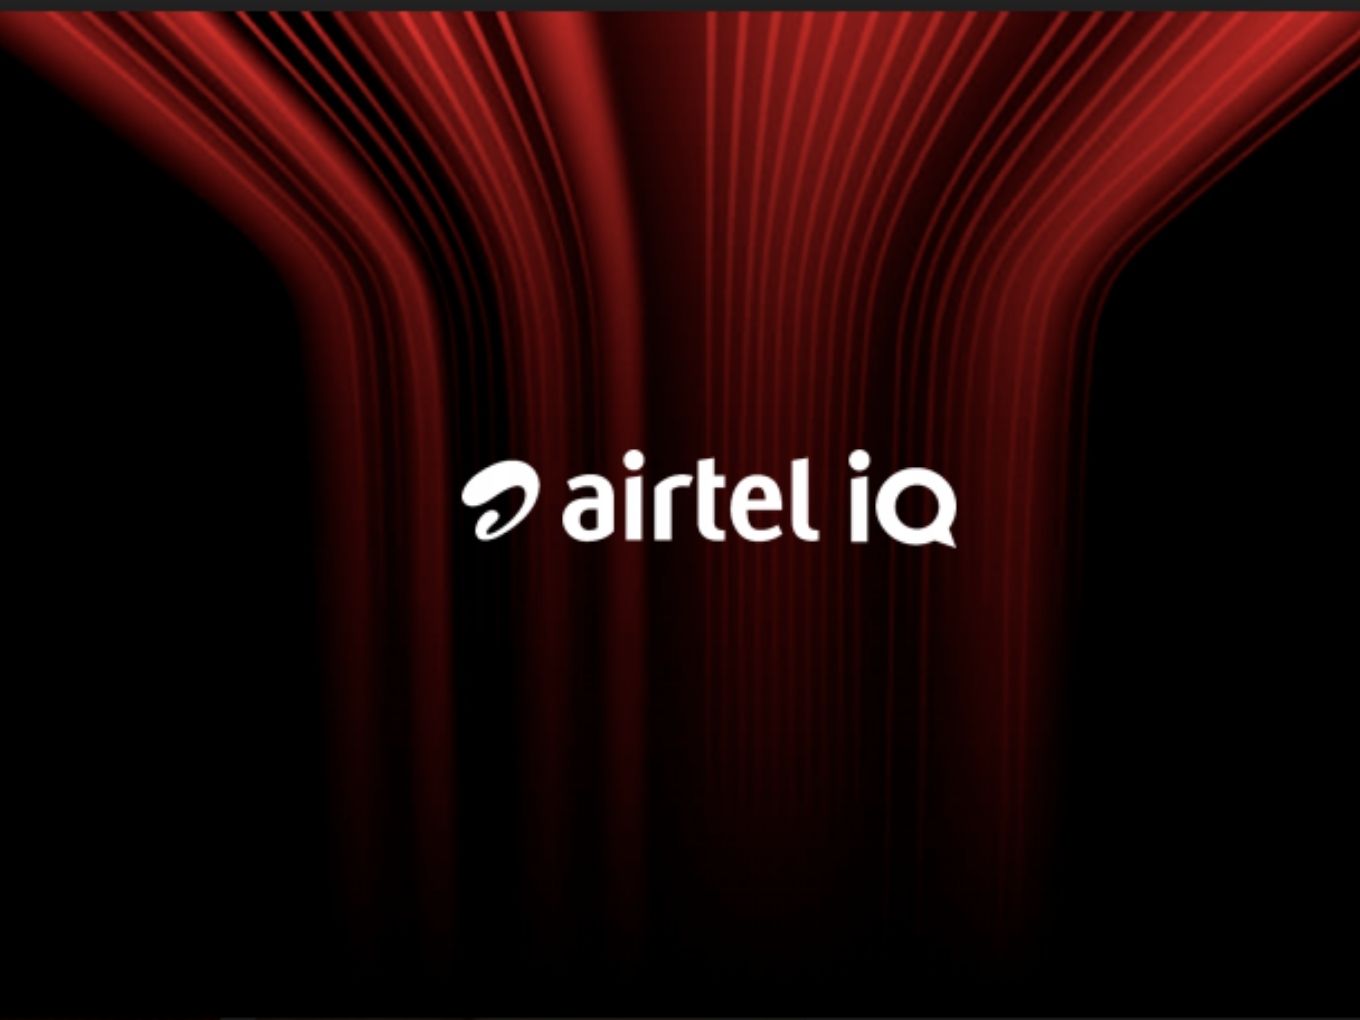 Airtel IQ Unify Enterprise Communication With Cloud Telephony Services